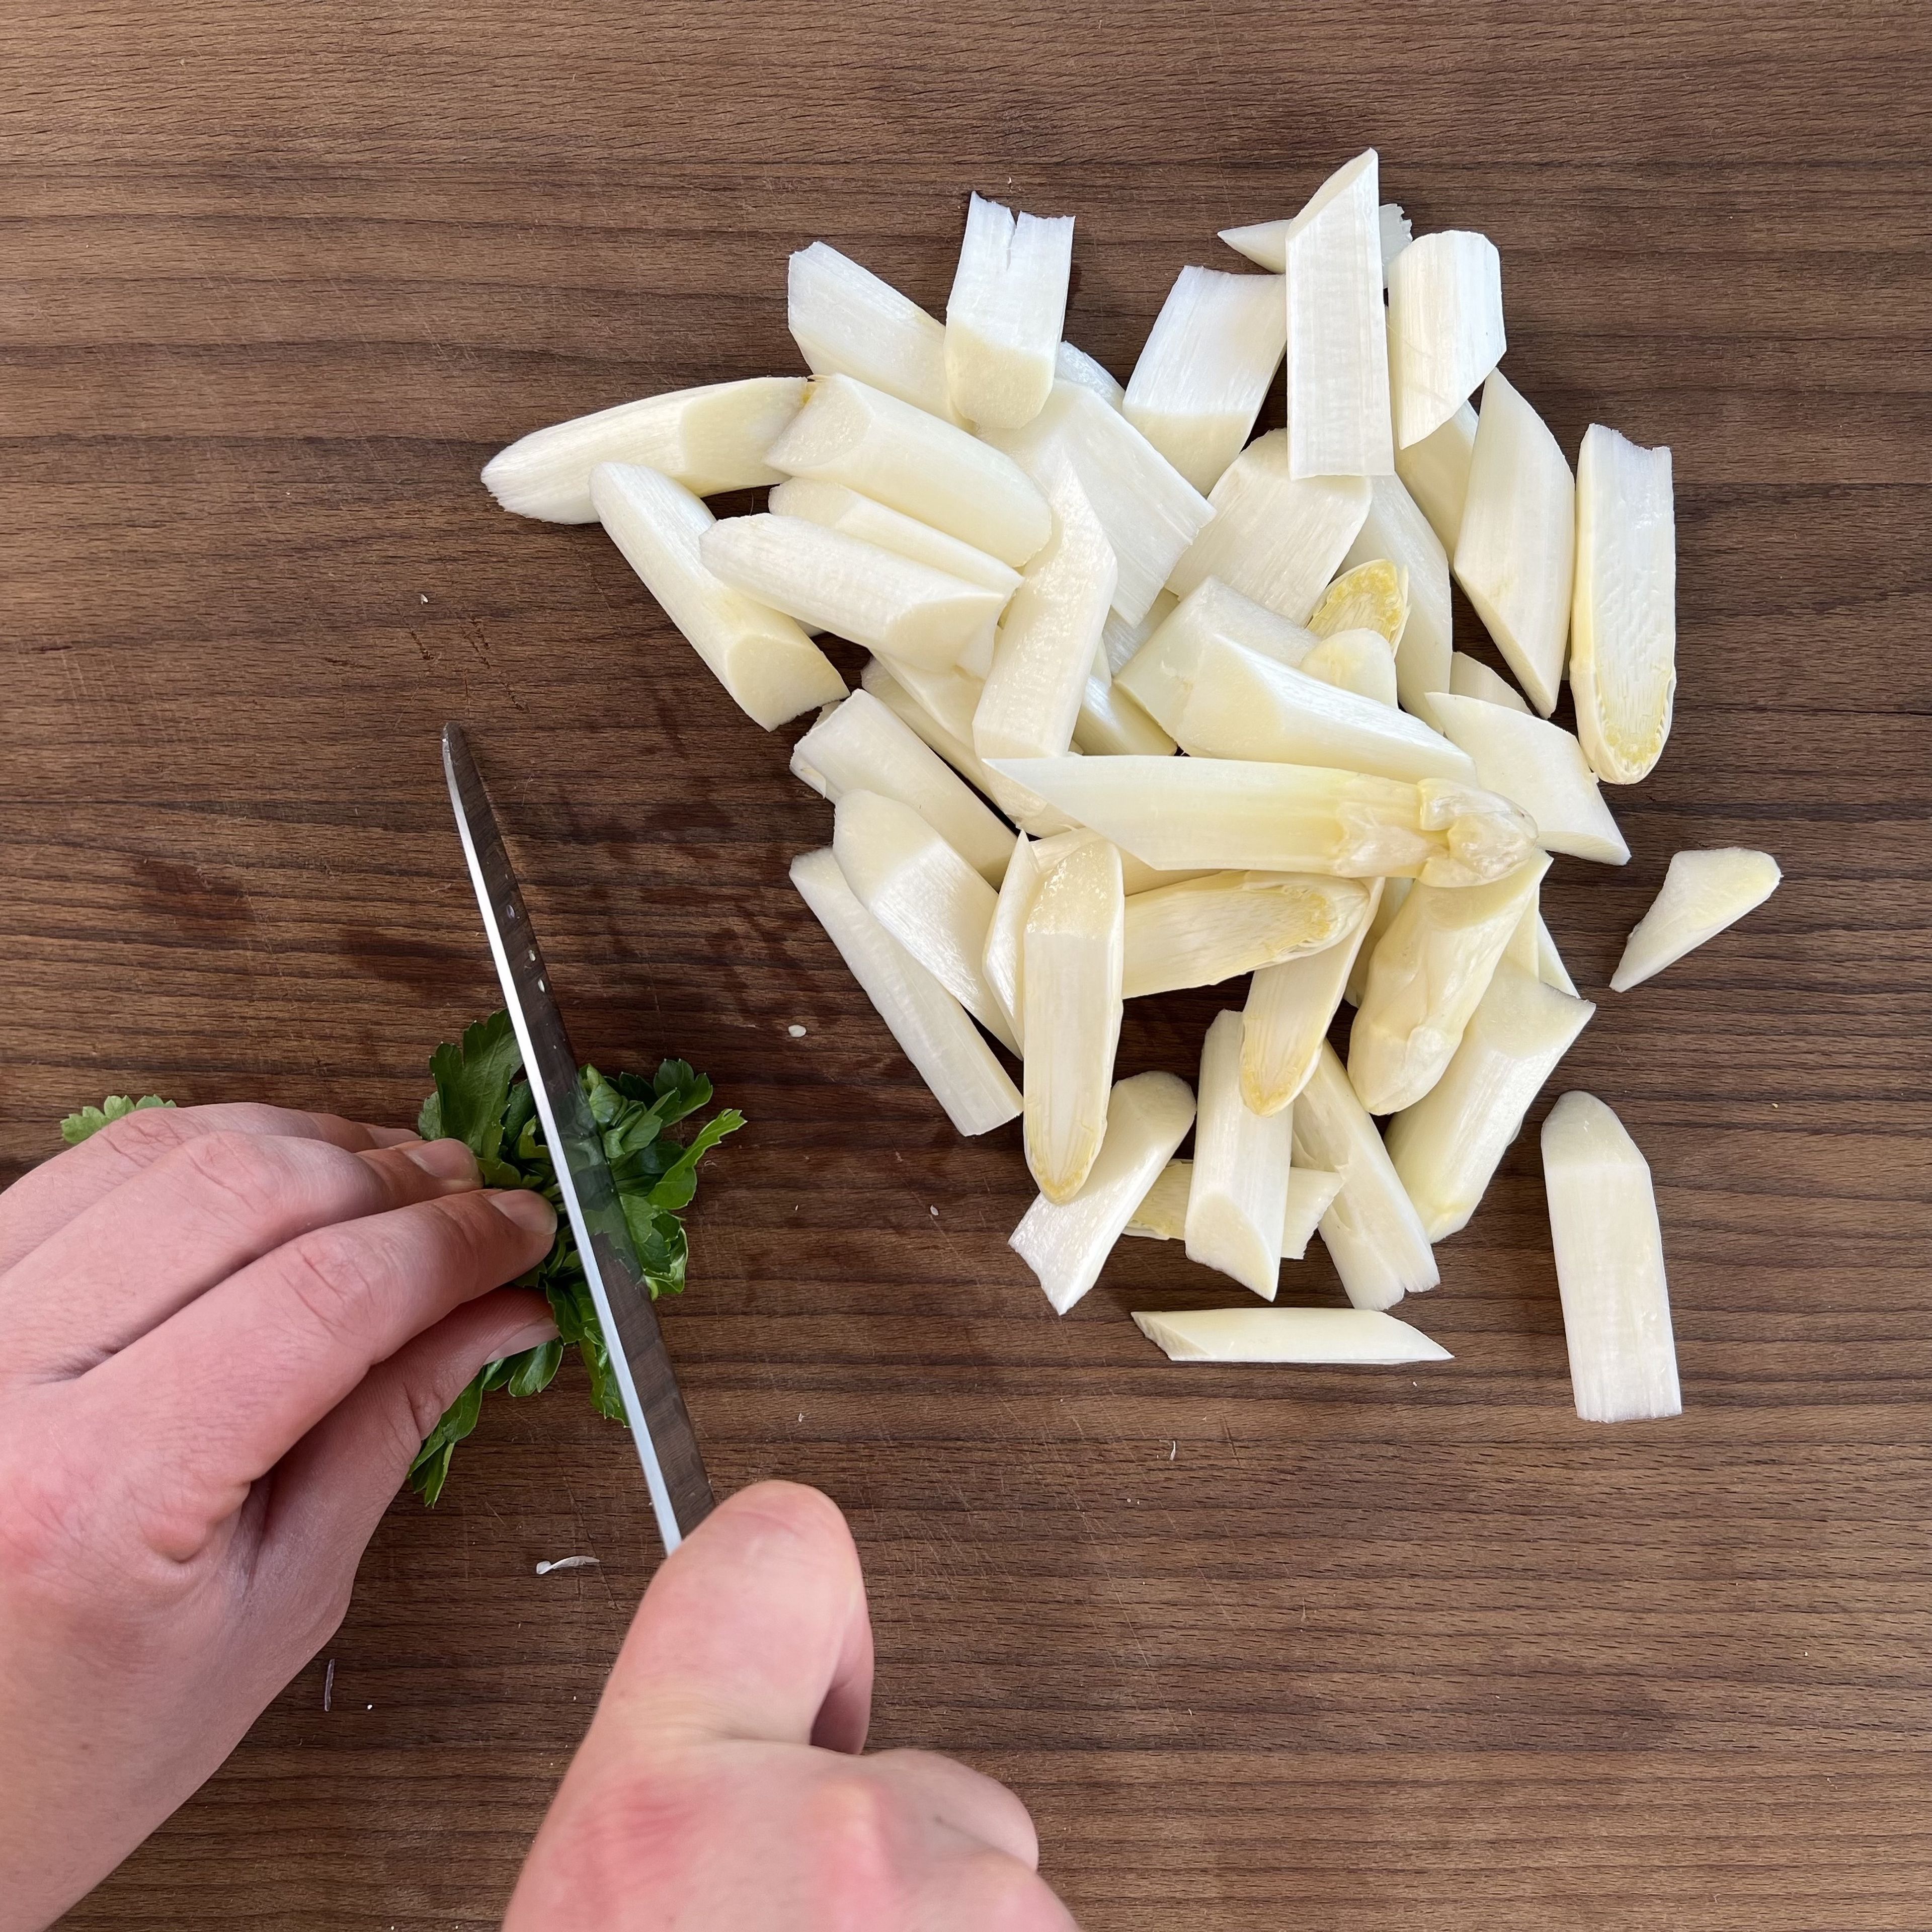 Peel the asparagus and cut diagonally into pieces approx. 2 cm long. Grate the zest of half a lemon. Finely chop the parsley and set aside.